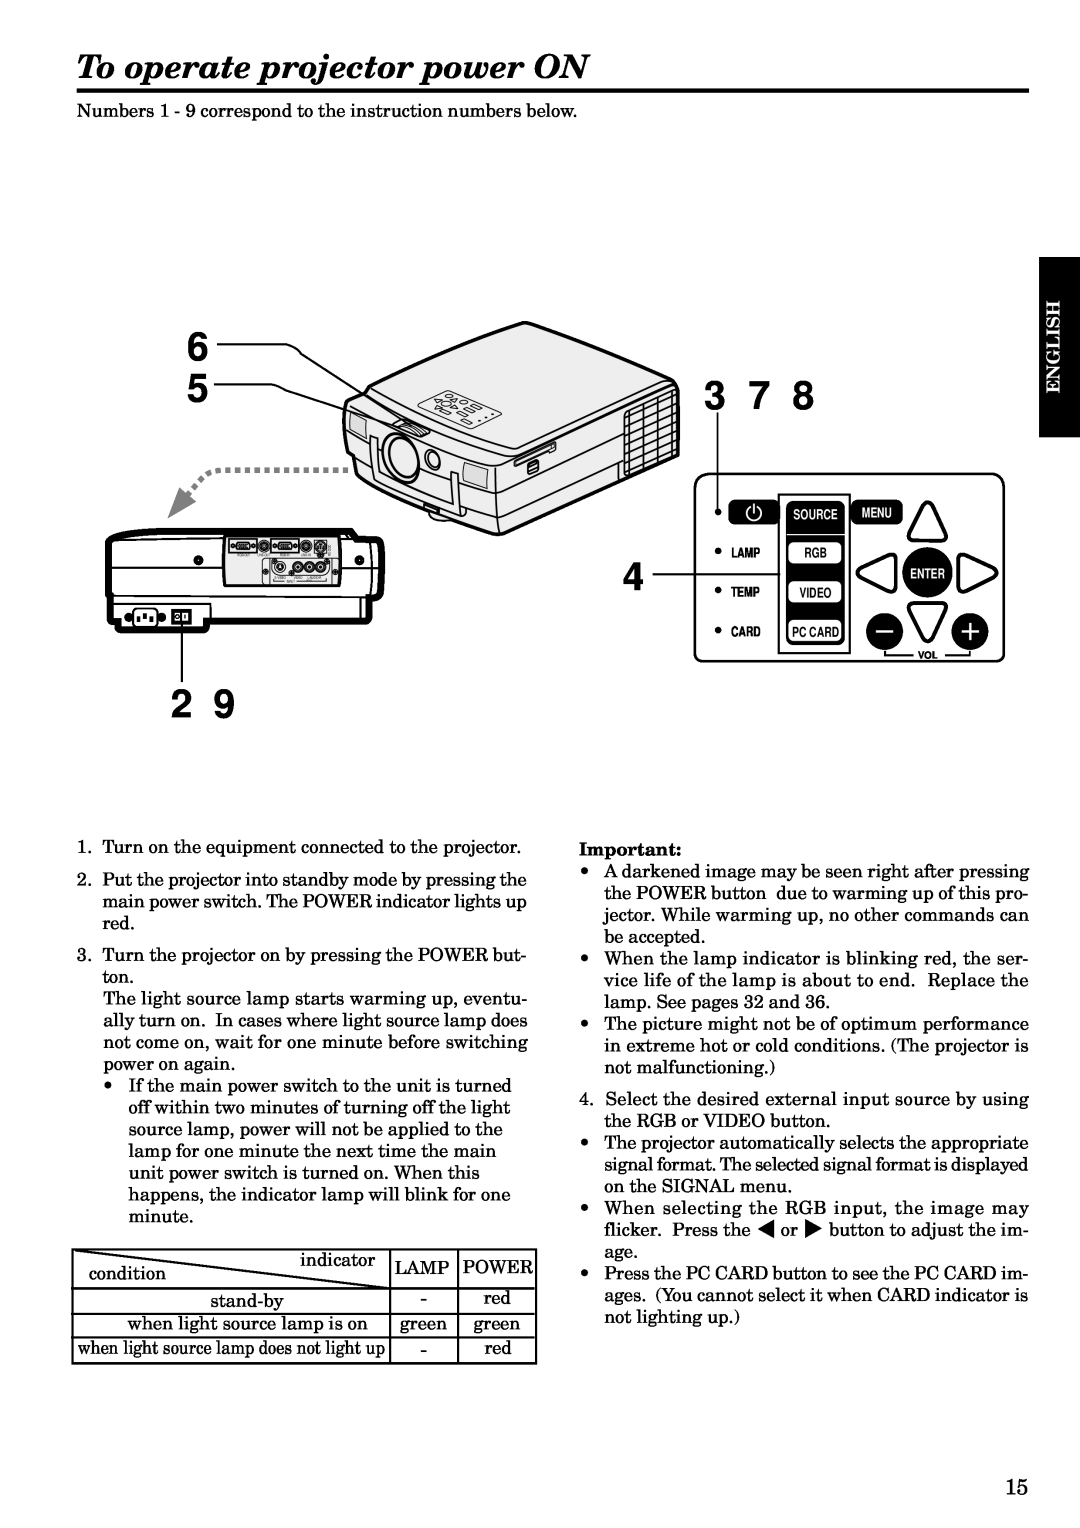 Mitsubishi Electronics LVP-X120A user manual To operate projector power ON, English, Lamp, Temp, Card 